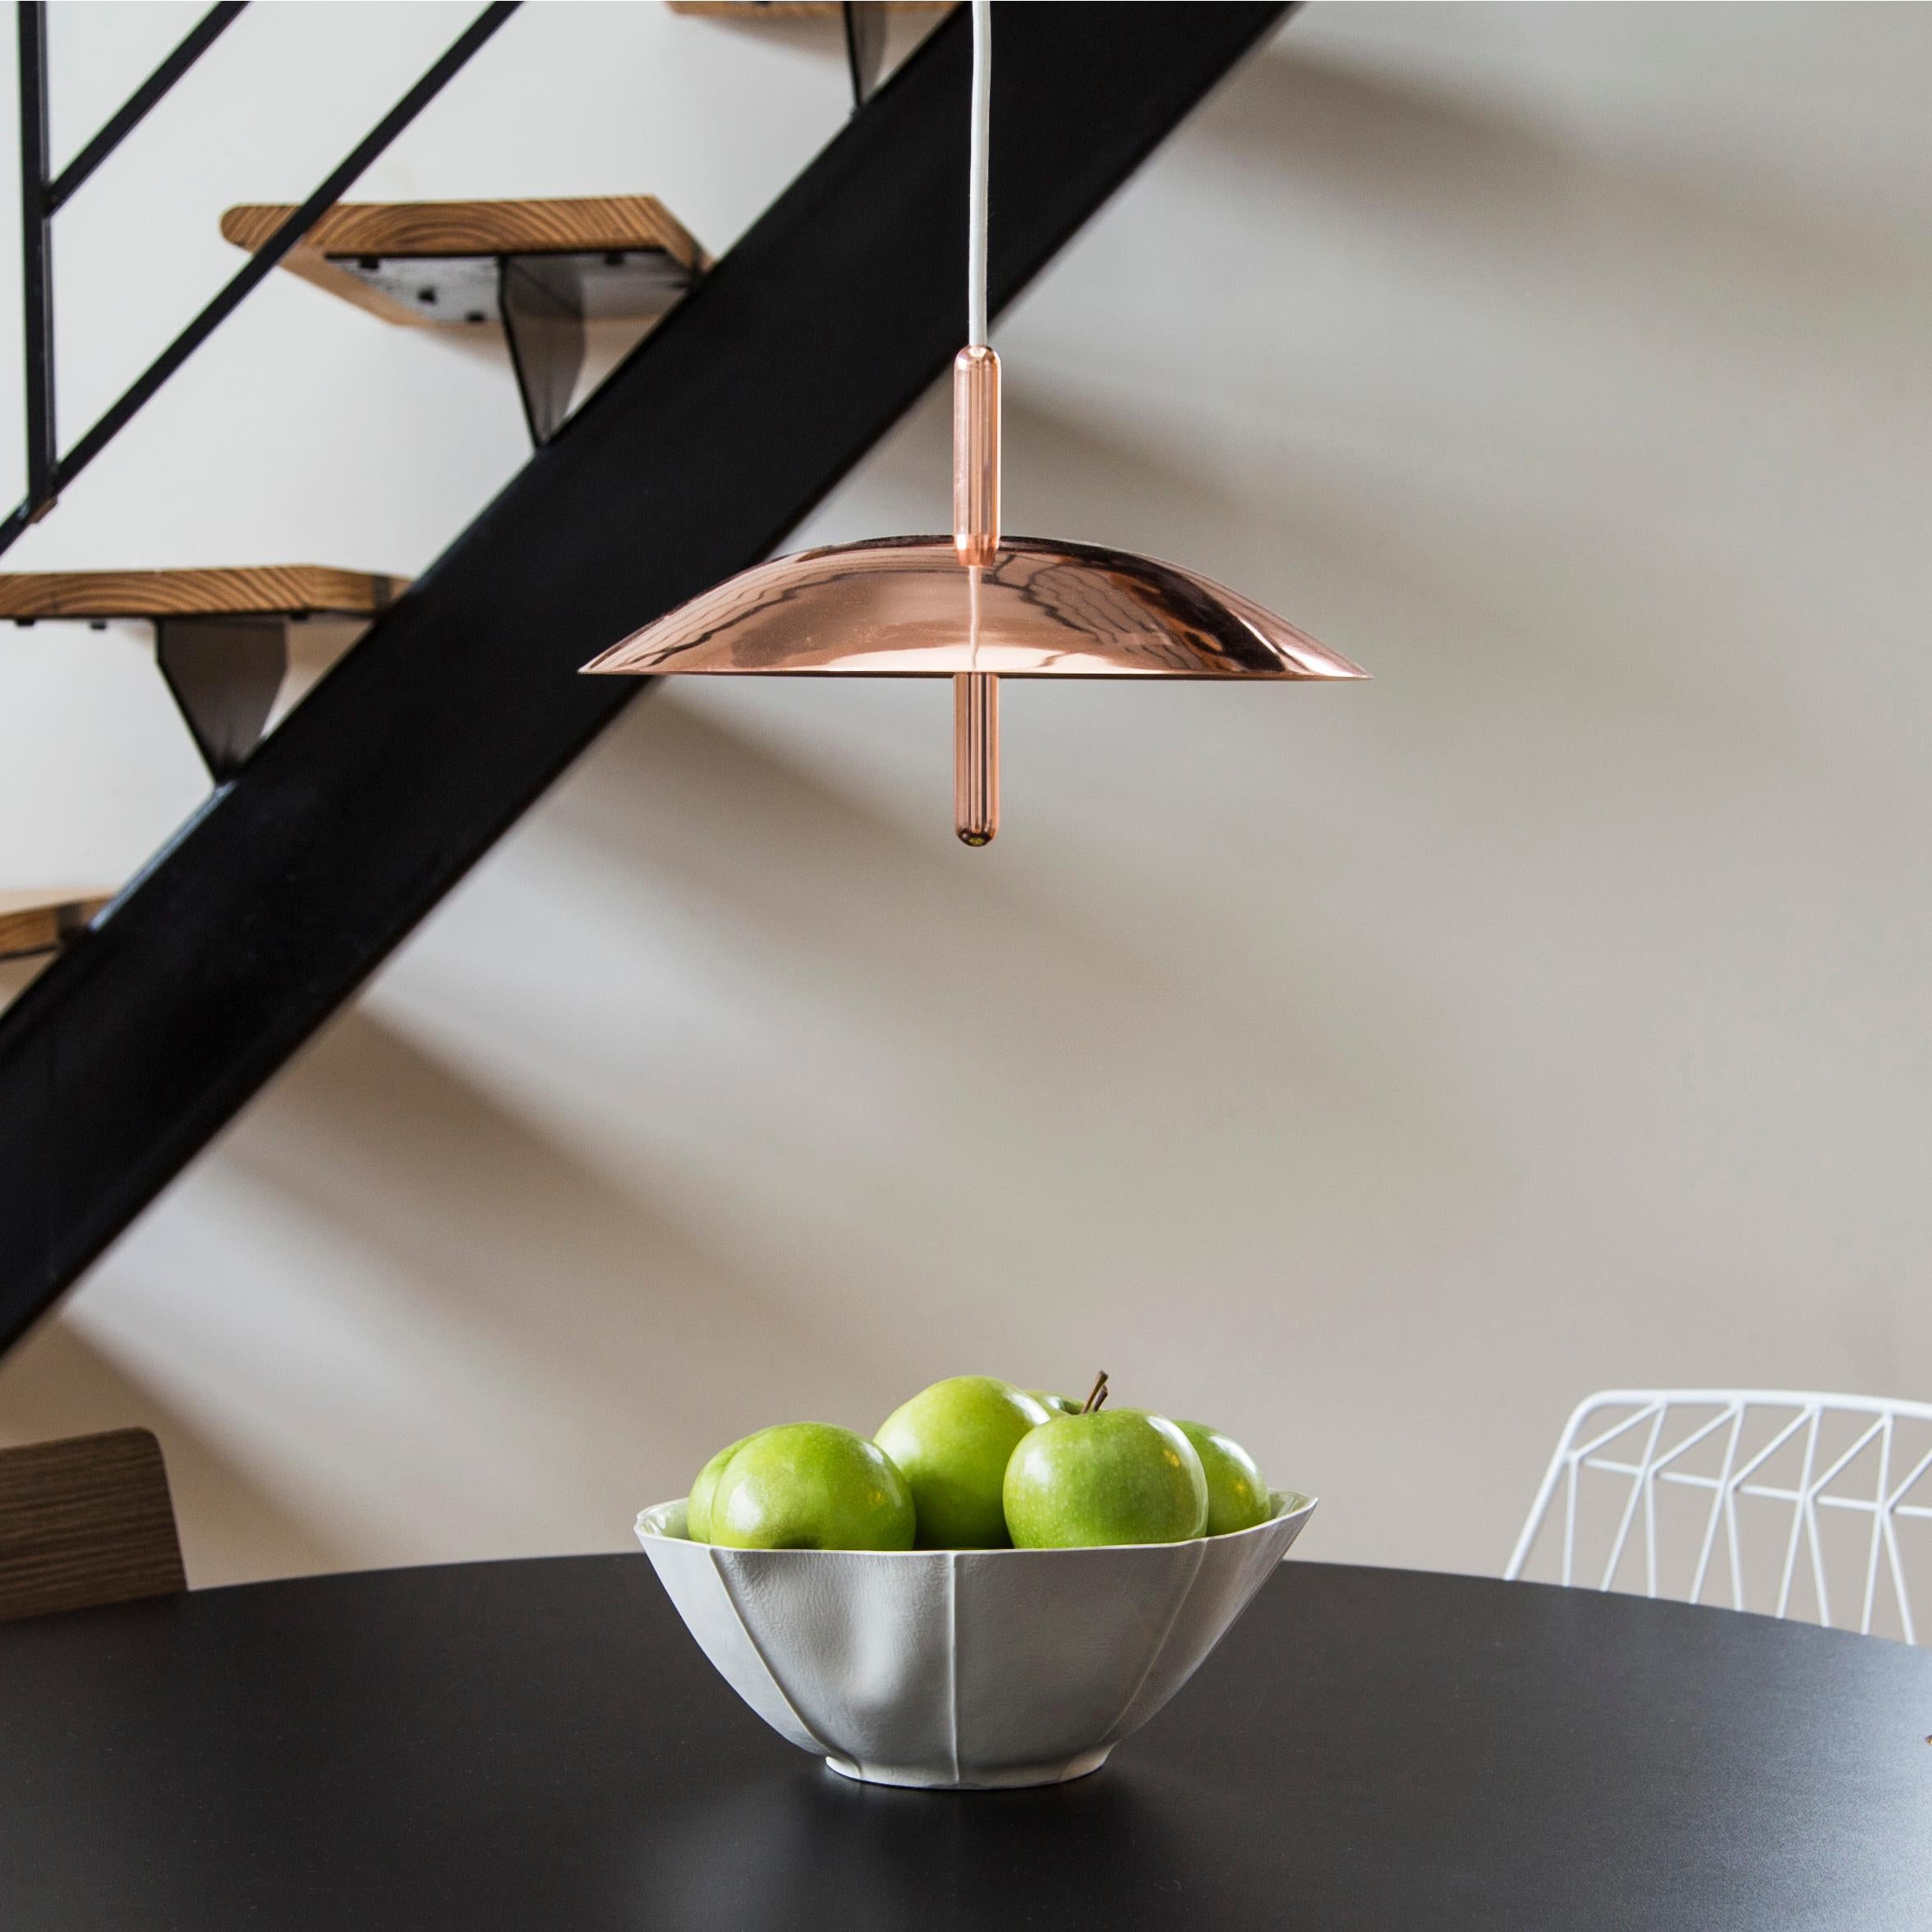 Utilizing warm LEDs and indirect light, signal pendants hover above any interior like a celestial body emitting a comforting glow. Consisting of a spun metal shade pierced by a polished central stem, the signal pendant is minimal and expressive.